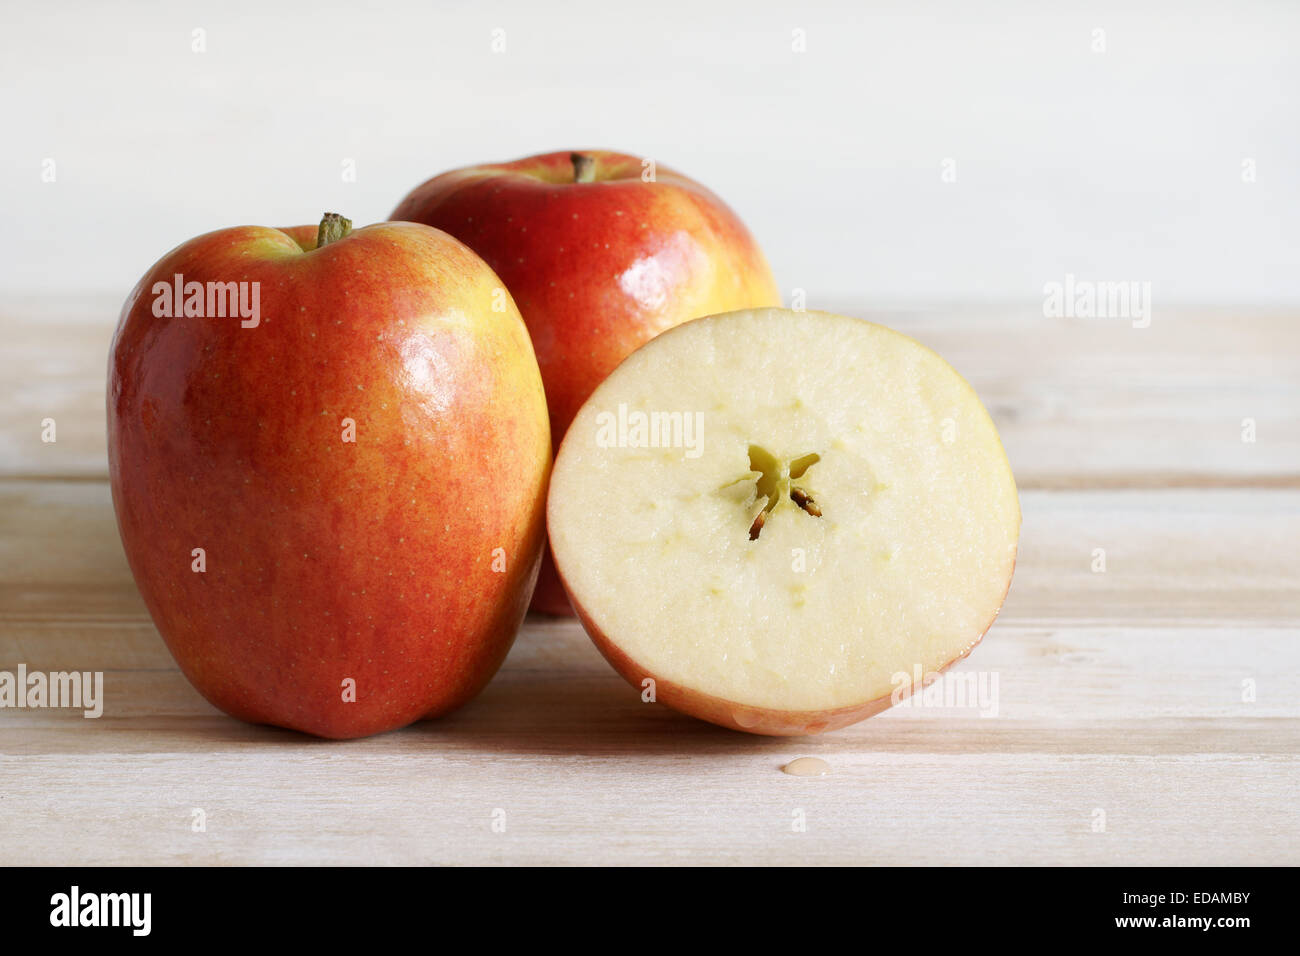 Jazz Apples or cultivar Scifresh a hybrid of Royal Gala and Braeburn developed in New Zealand Stock Photo